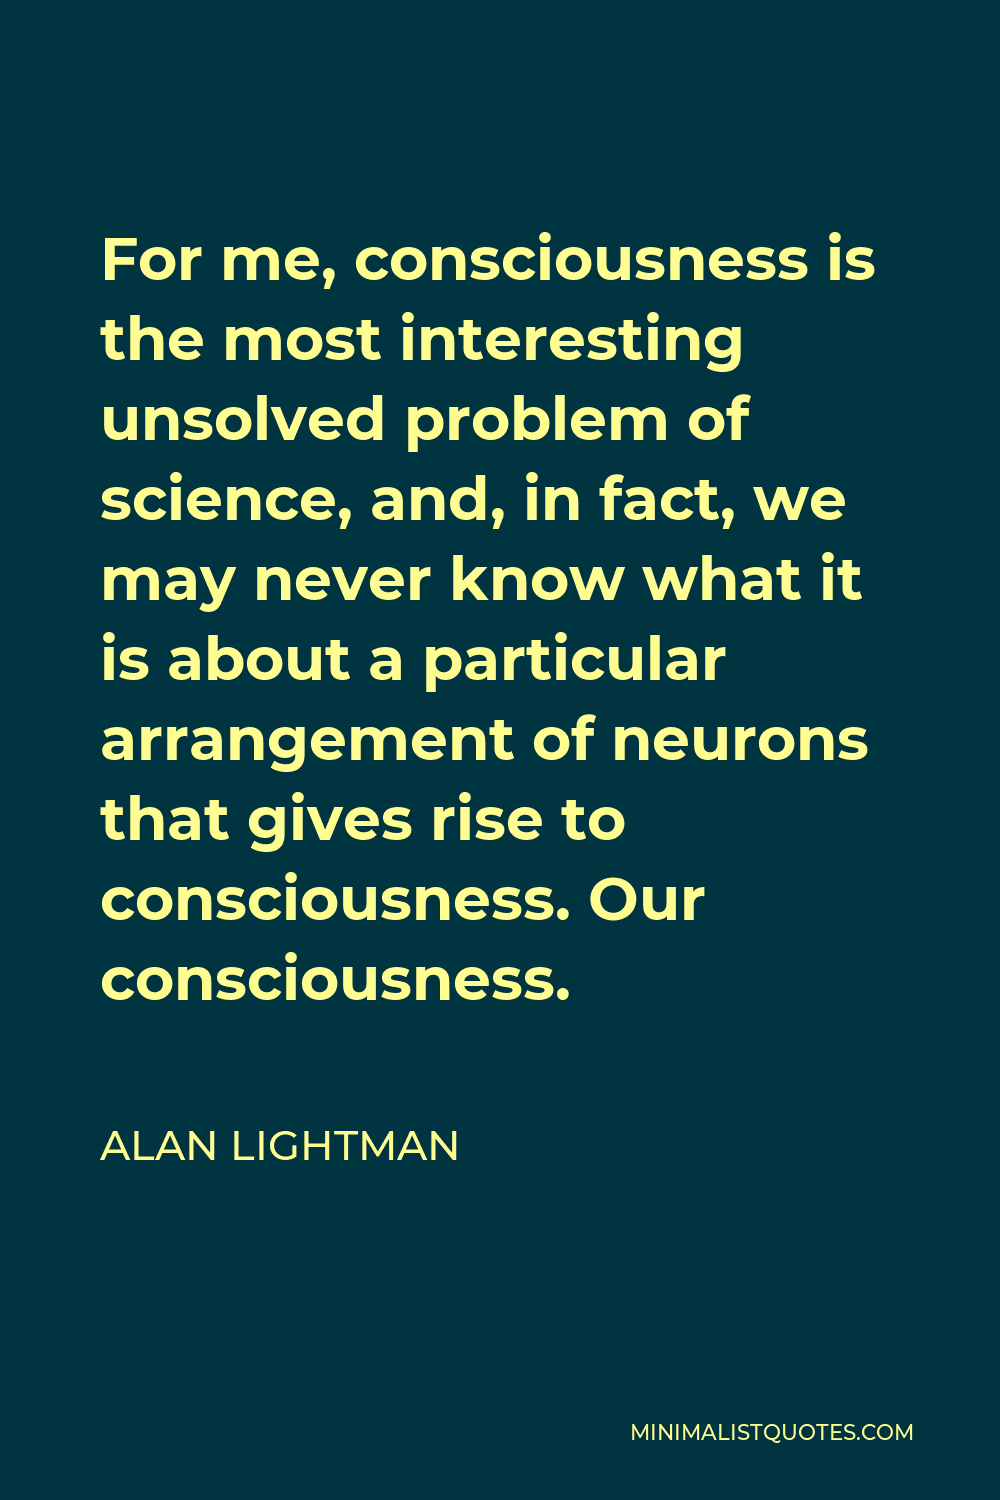 Alan Lightman Quote - For me, consciousness is the most interesting unsolved problem of science, and, in fact, we may never know what it is about a particular arrangement of neurons that gives rise to consciousness. Our consciousness.